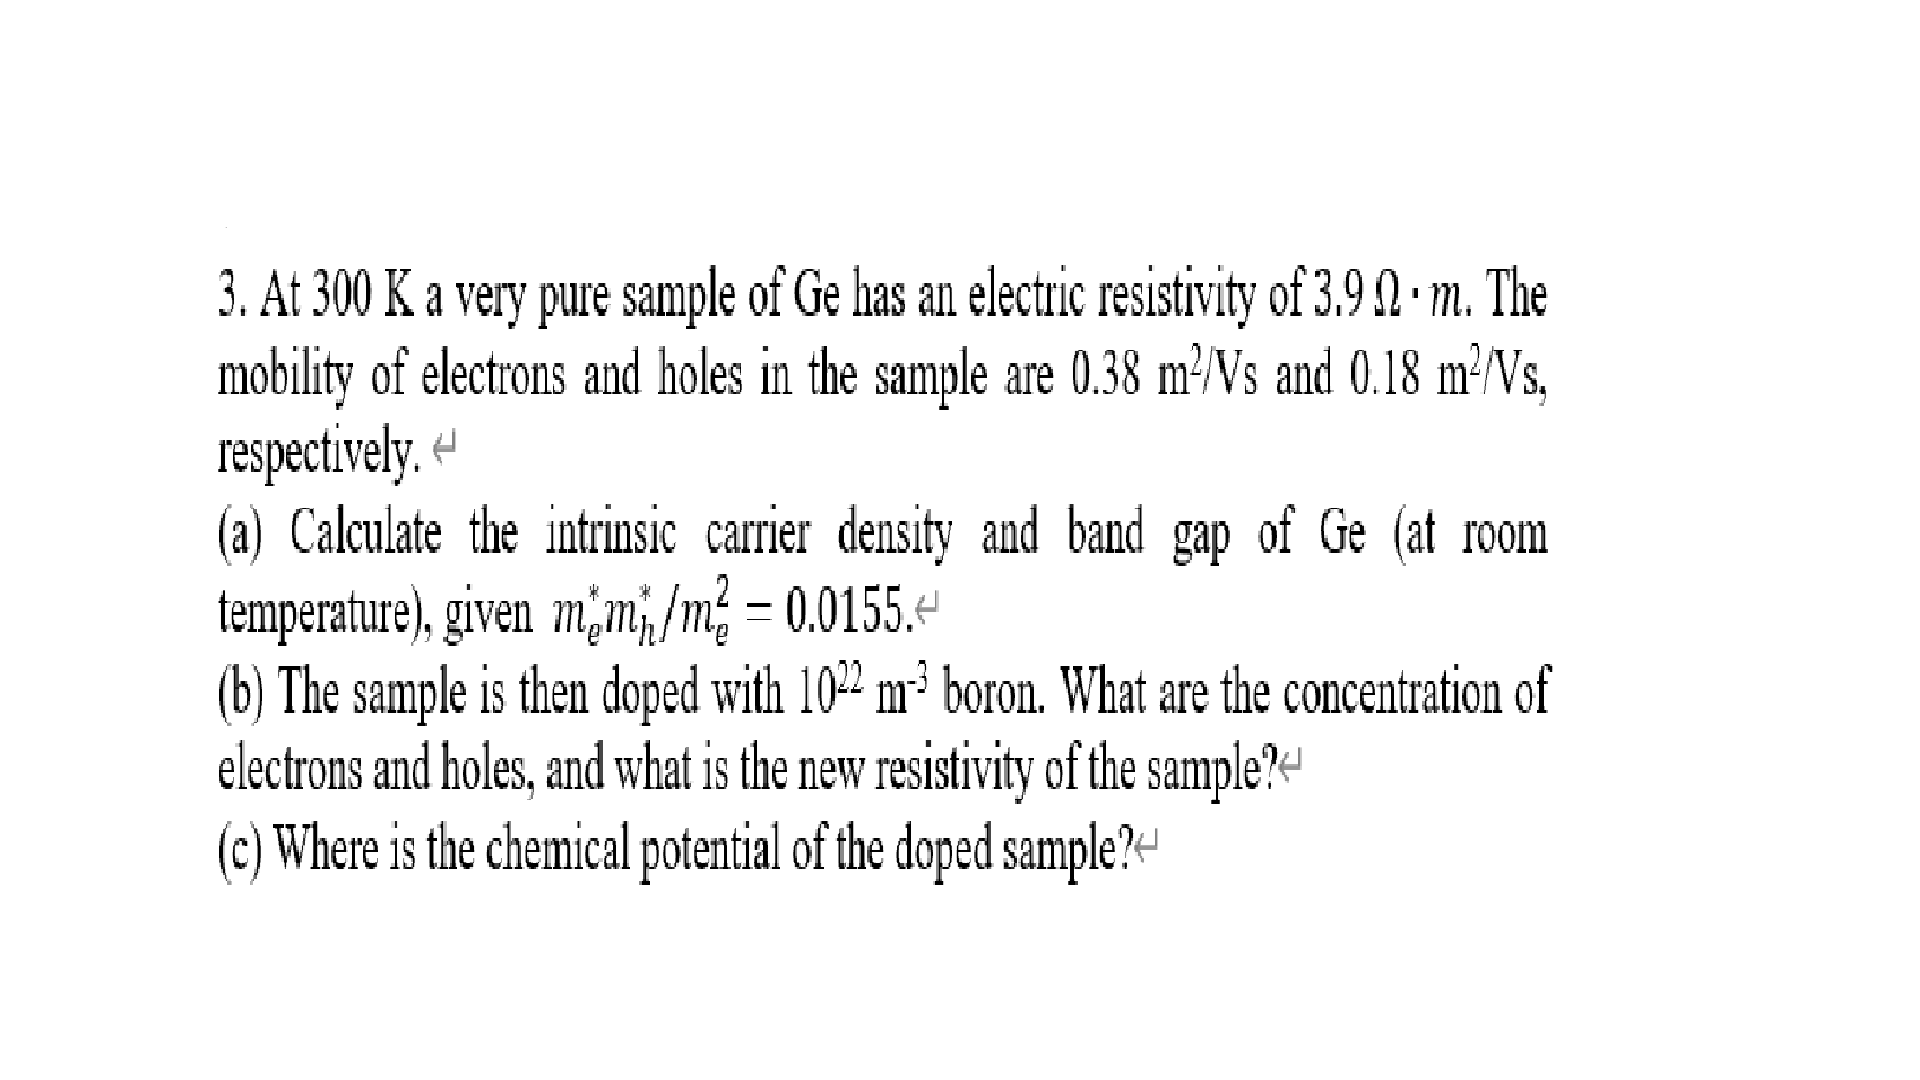 3. At 300 K a very pure sample of Ge has an electric resistivity of 3.9 2 · m. The
mobility of electrons and holes in the sample are 0.38 m³/Vs and 0.18 ²²NS,
respectively. «
(a) Calculate the intrinsic carrier density and band gap of Ge (at room
temperature), given m,m,/m² = 0.0155.+
(b) The sample is then doped with 102 m³ boron. What are the concentration of
electrons and holes, and what is the new resistivity of the sample?«
(c) Where is the chemical potential of the doped sample?«
